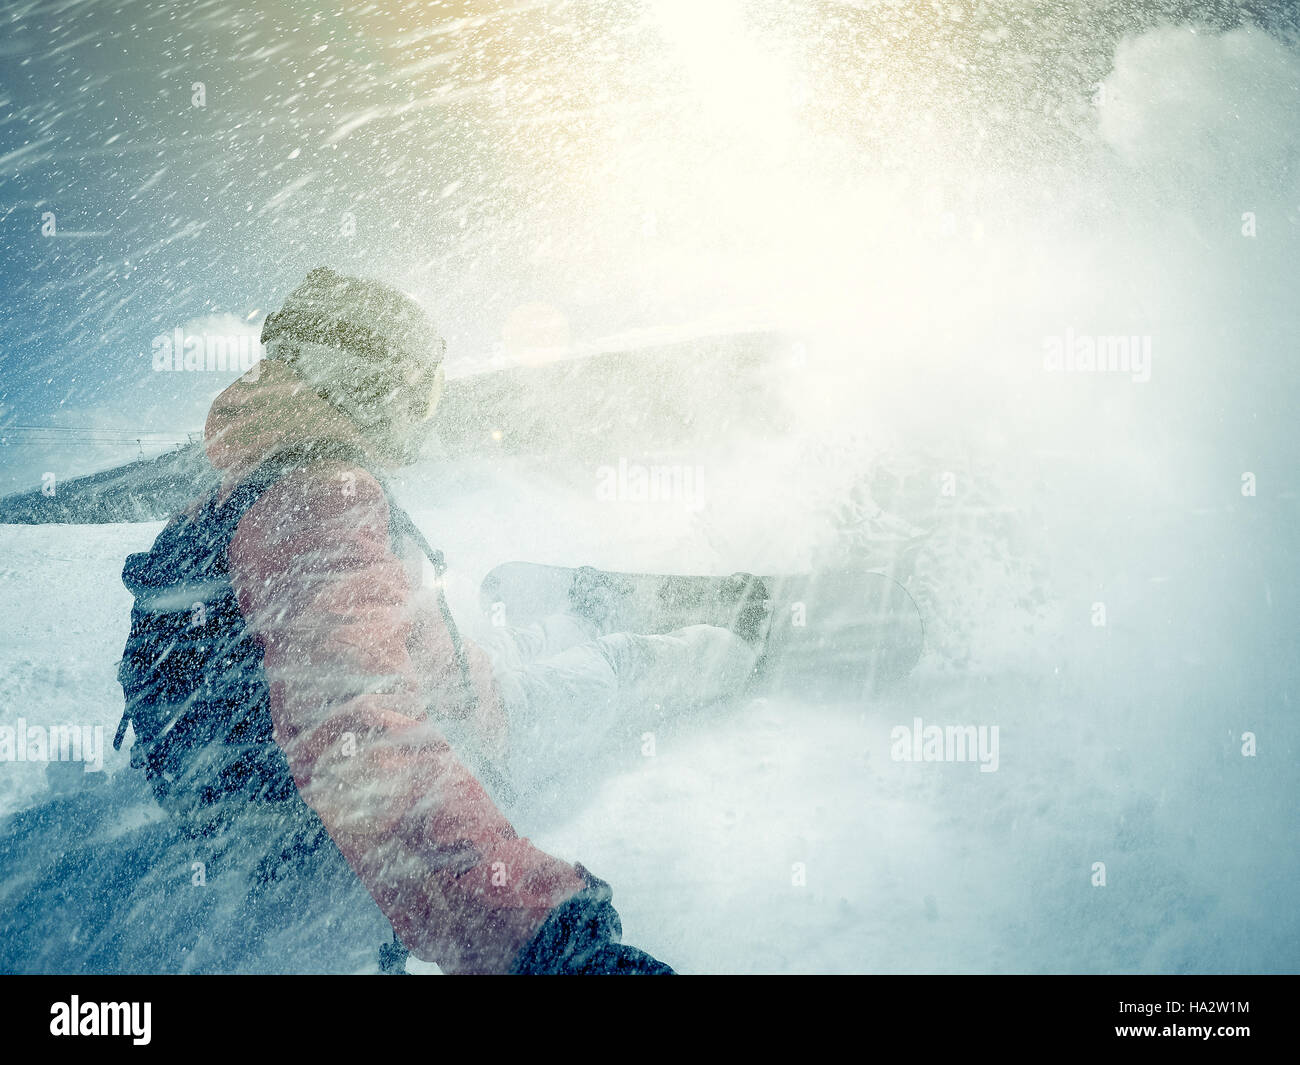 Snowboarder wiping out in snow Stock Photo